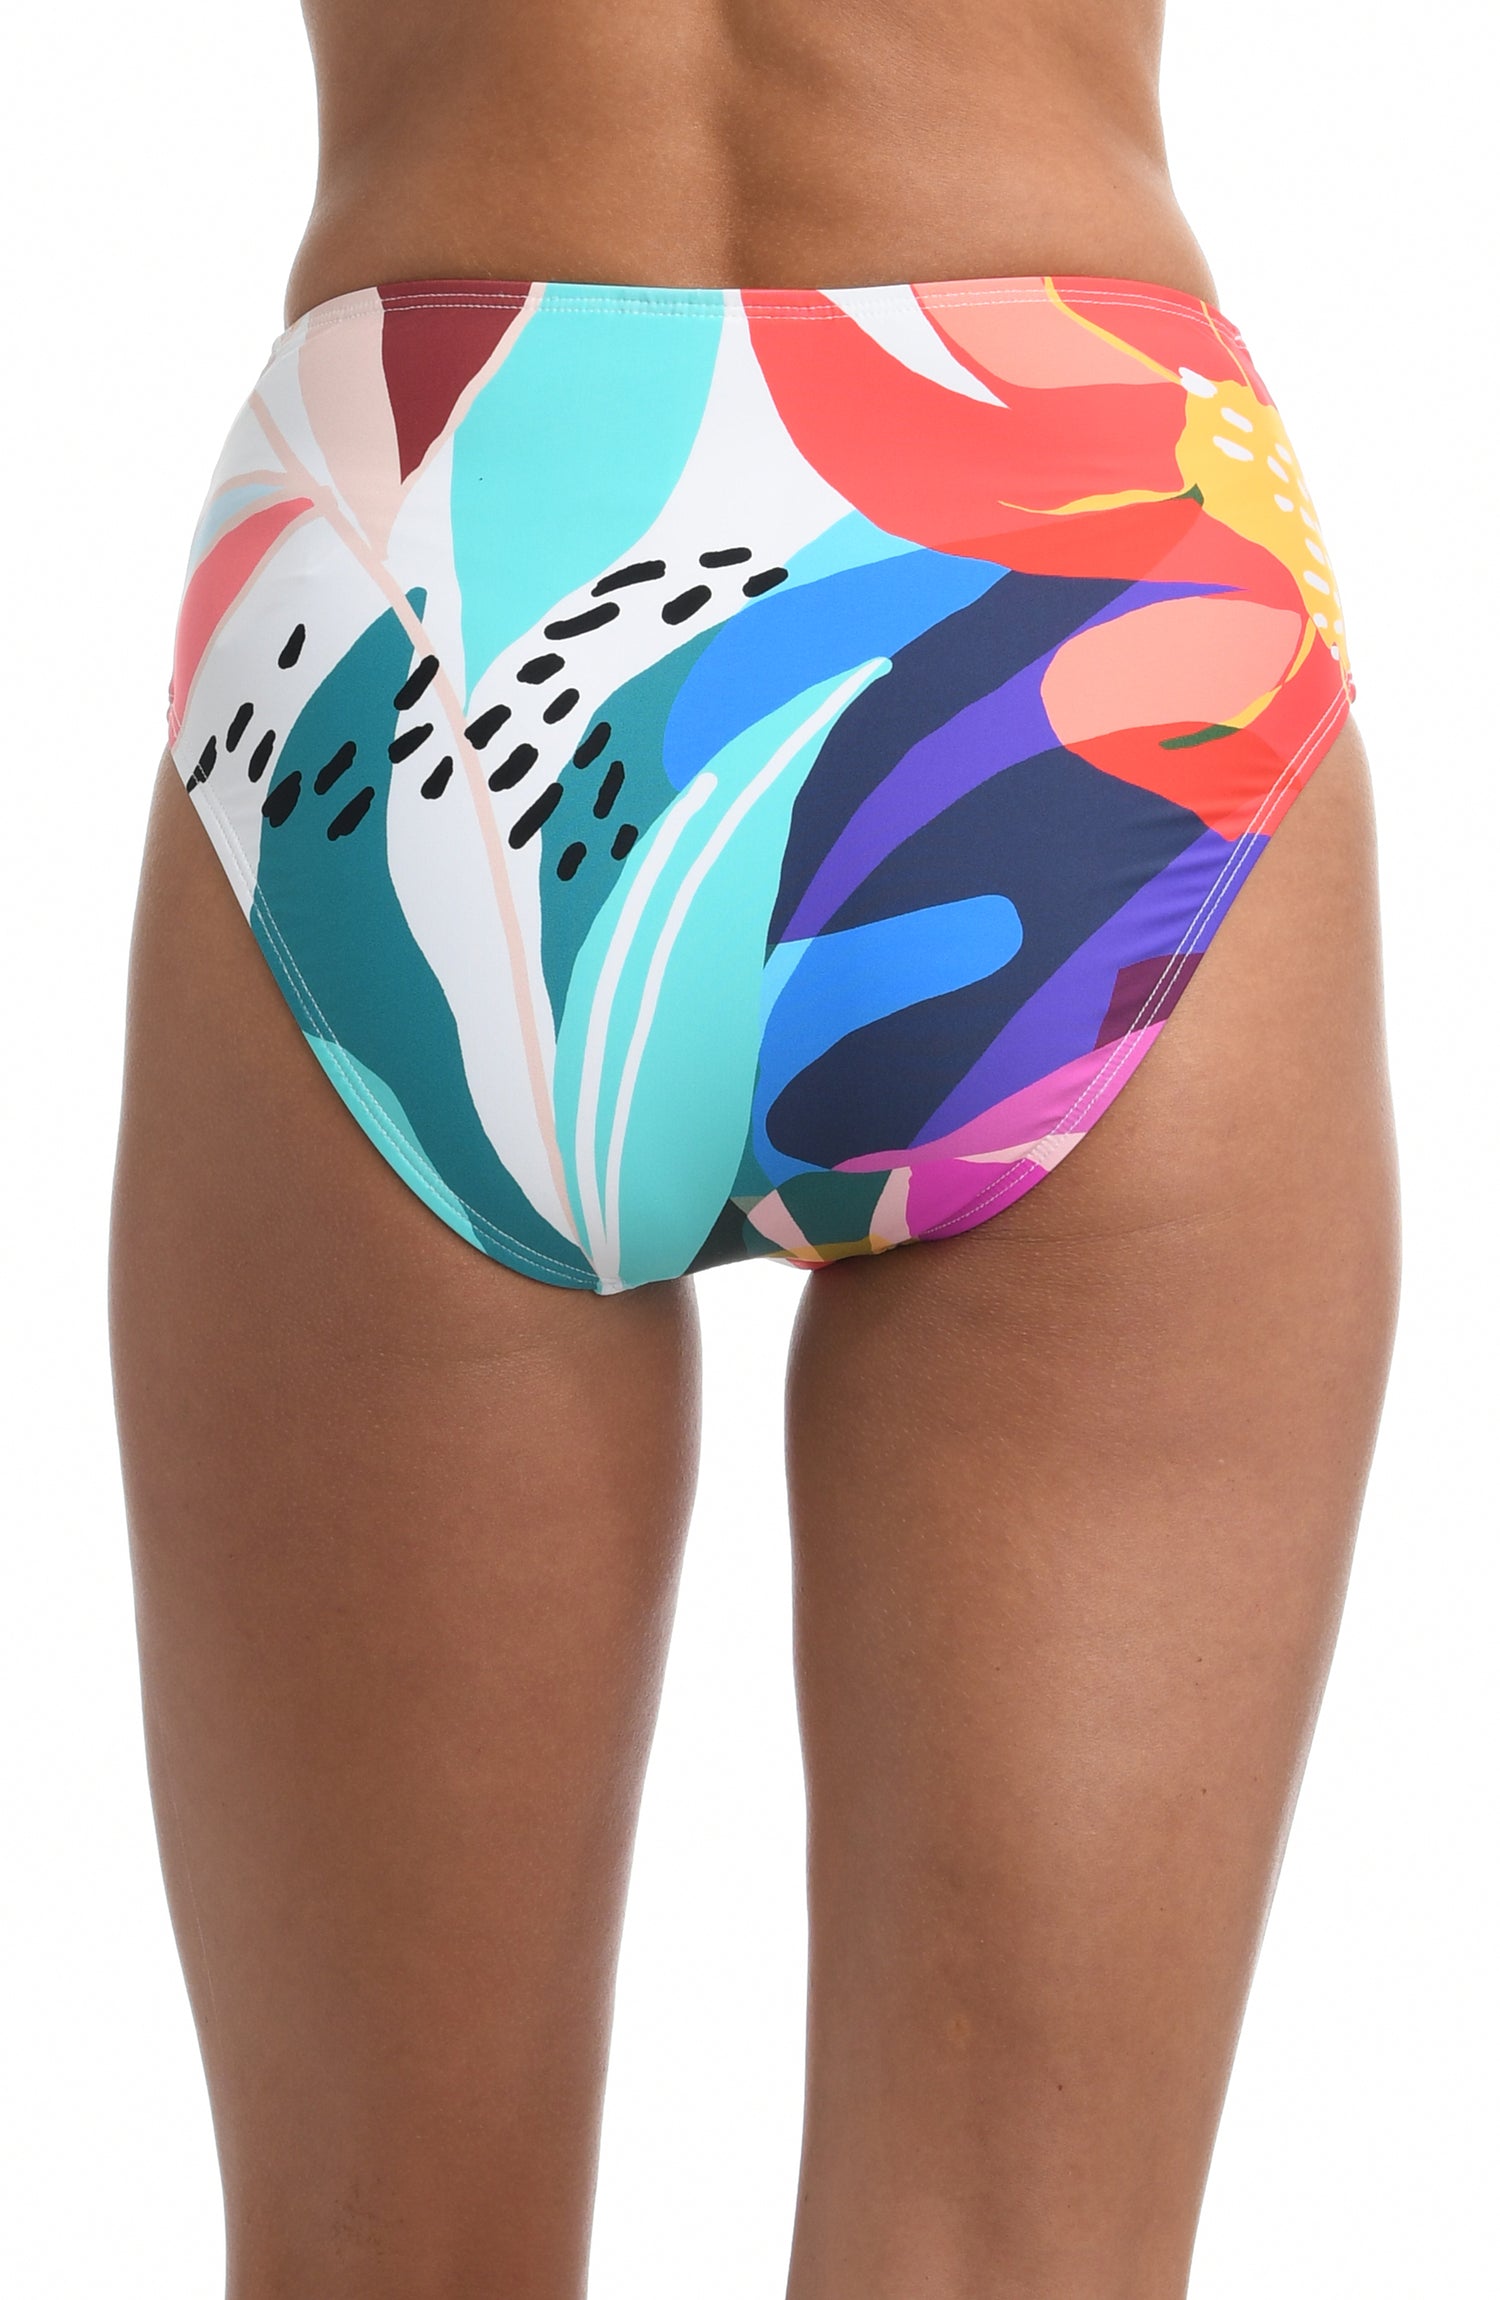 Model is wearing a multi colored tropical printed high waist swimsuit bottom from our Eclectic Shore collection.